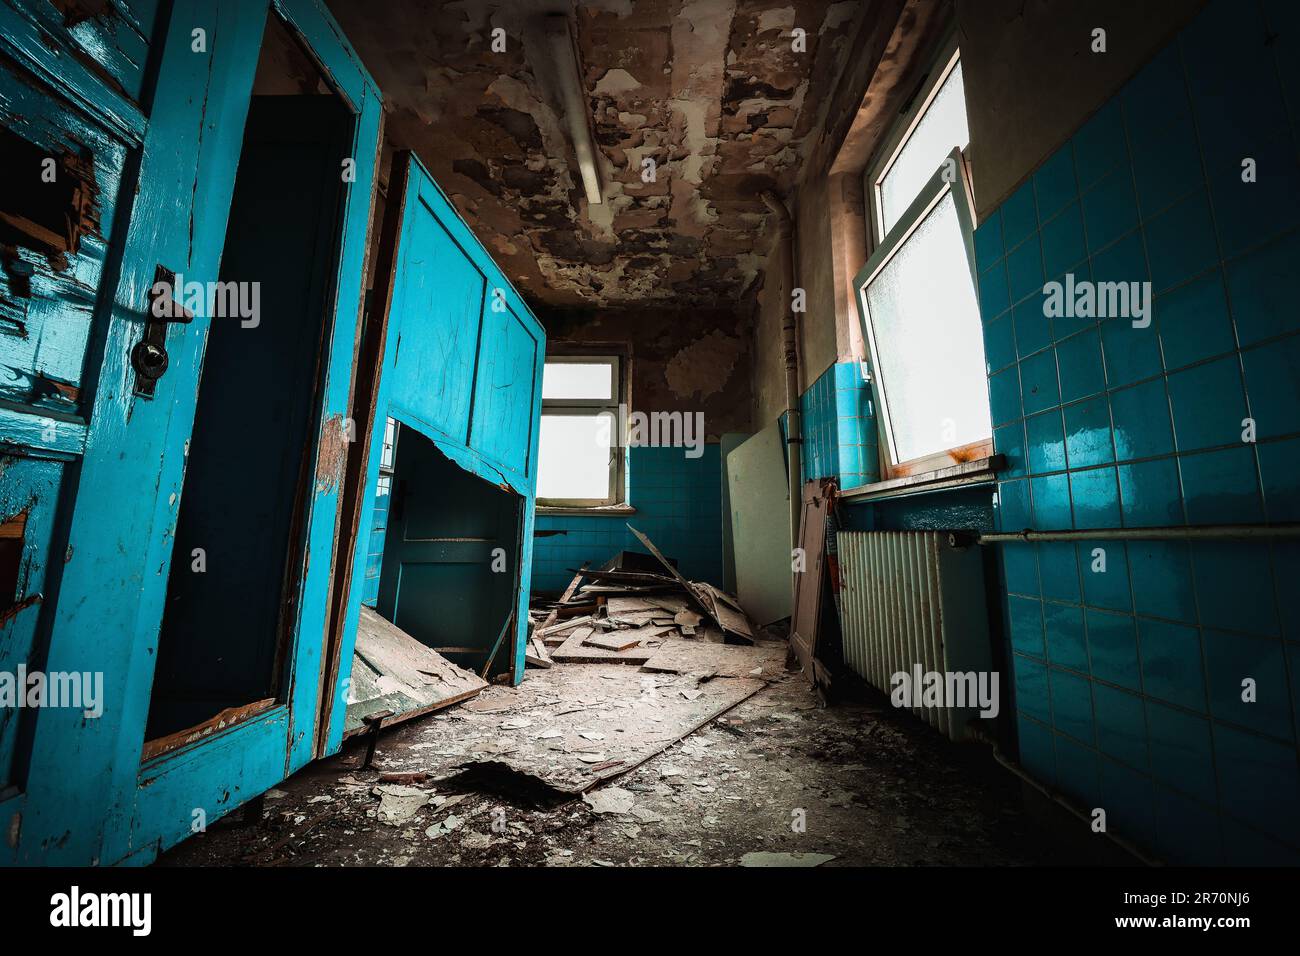 interior in a lost place bathroom Stock Photo